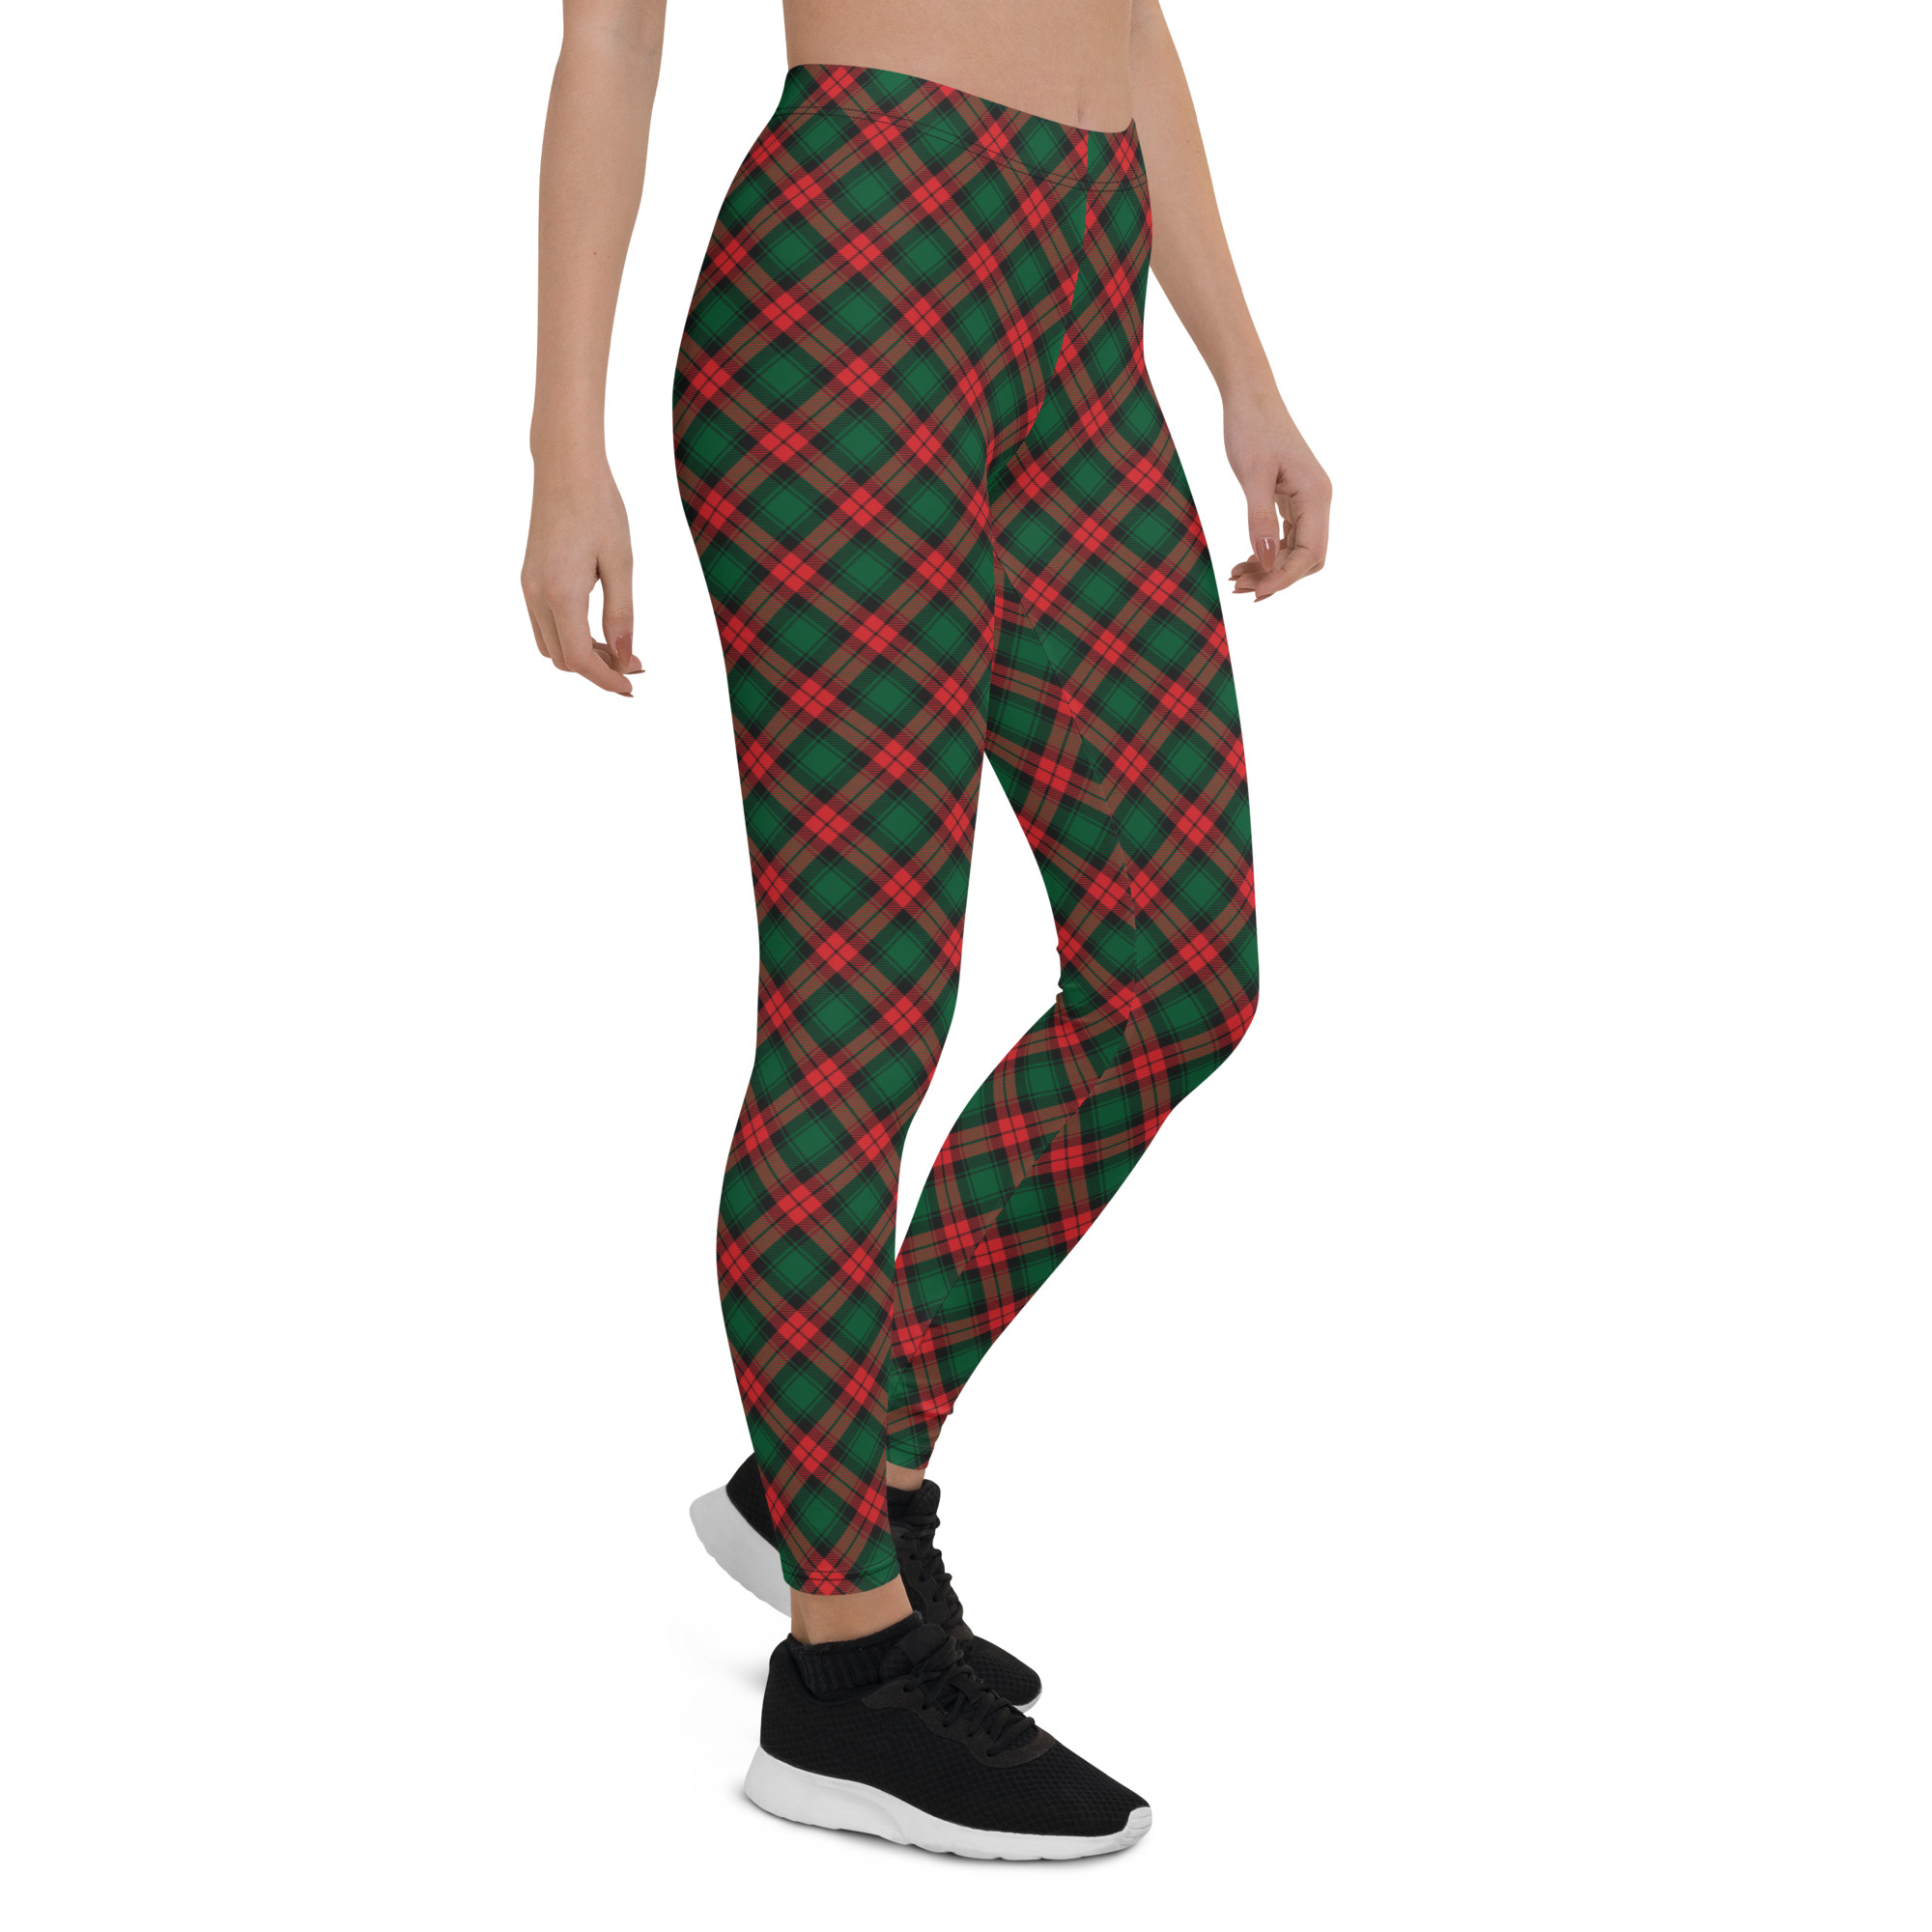 Pin by Michelle Rose on CLOTHING-Women's | Plaid fashion, Red plaid pants,  Outfits with leggings